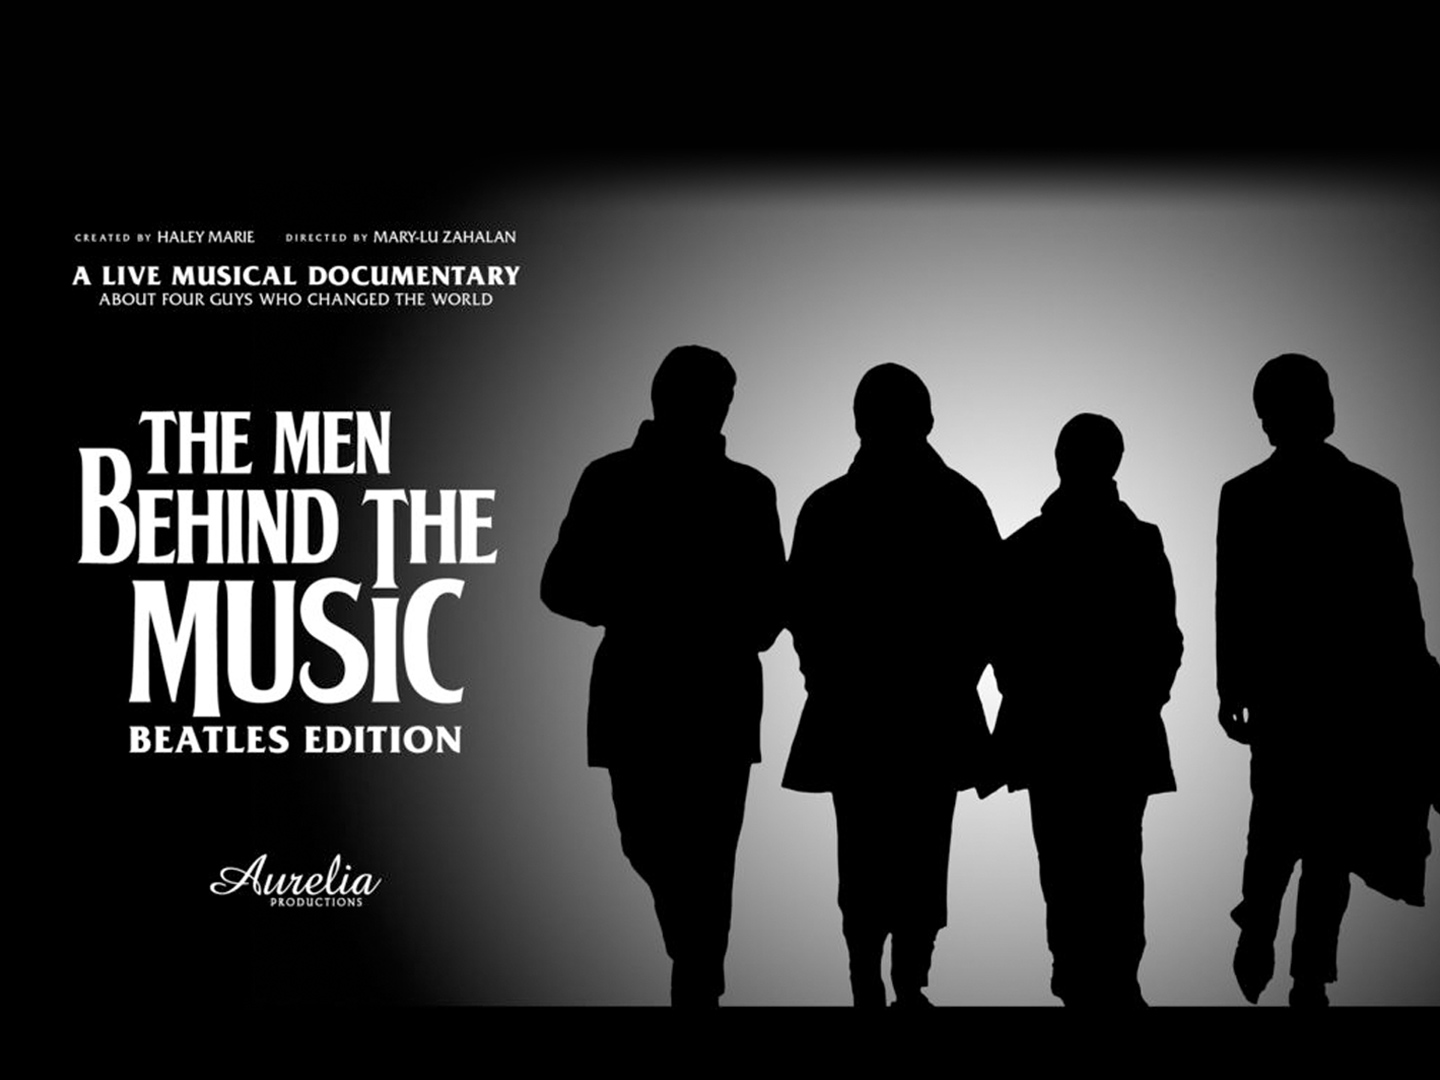 The Men Behind the Music: Beatles Edition